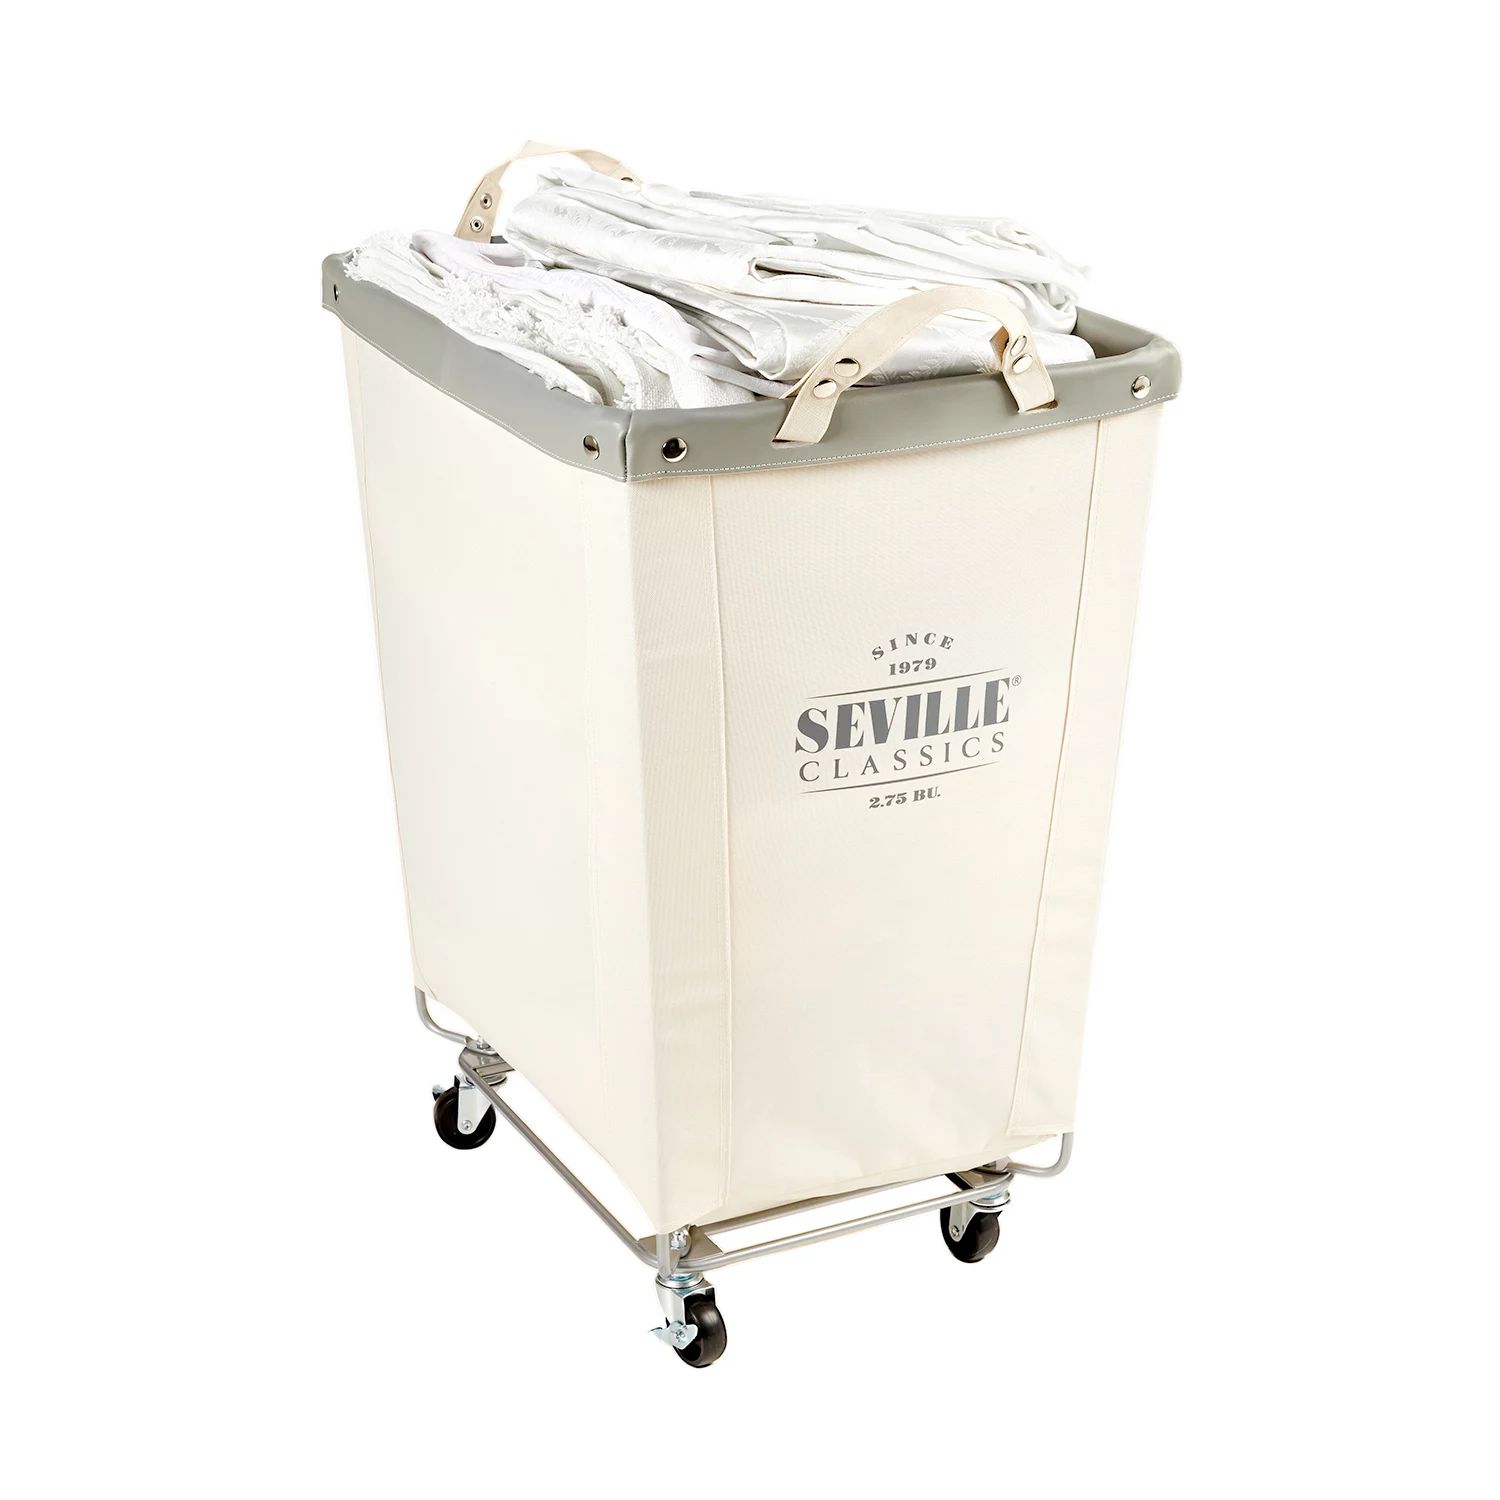 Seville Classics Commercial Heavy-Duty Canvas Laundry Hamper with Wheels | Sam's Club